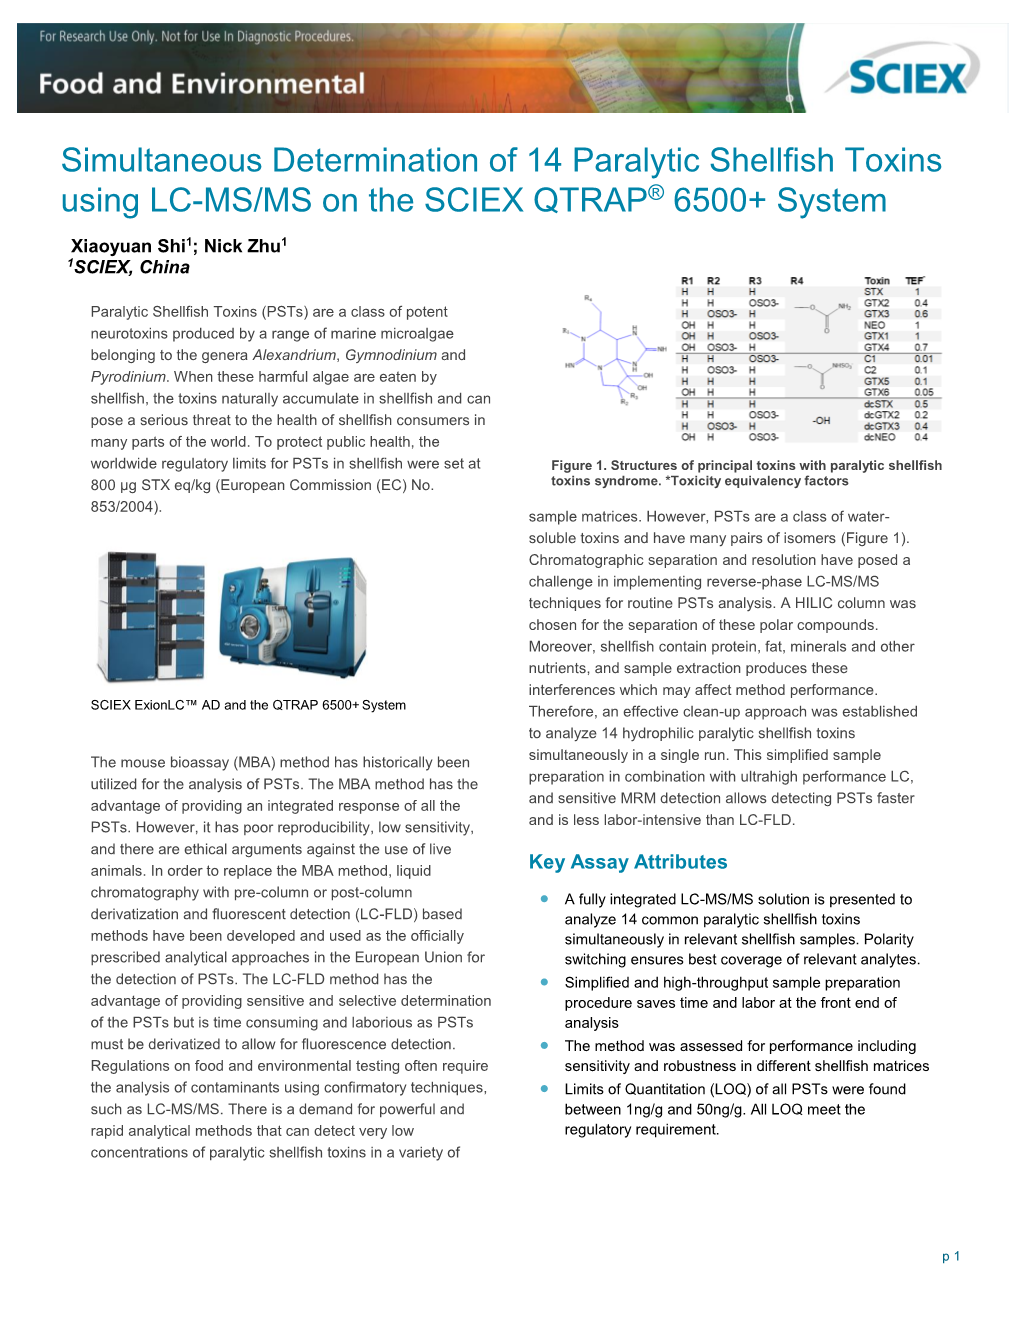 Simultaneous Determination of 14 Paralytic Shellfish Toxins Using LC-MS/MS on the SCIEX QTRAP® 6500+ System